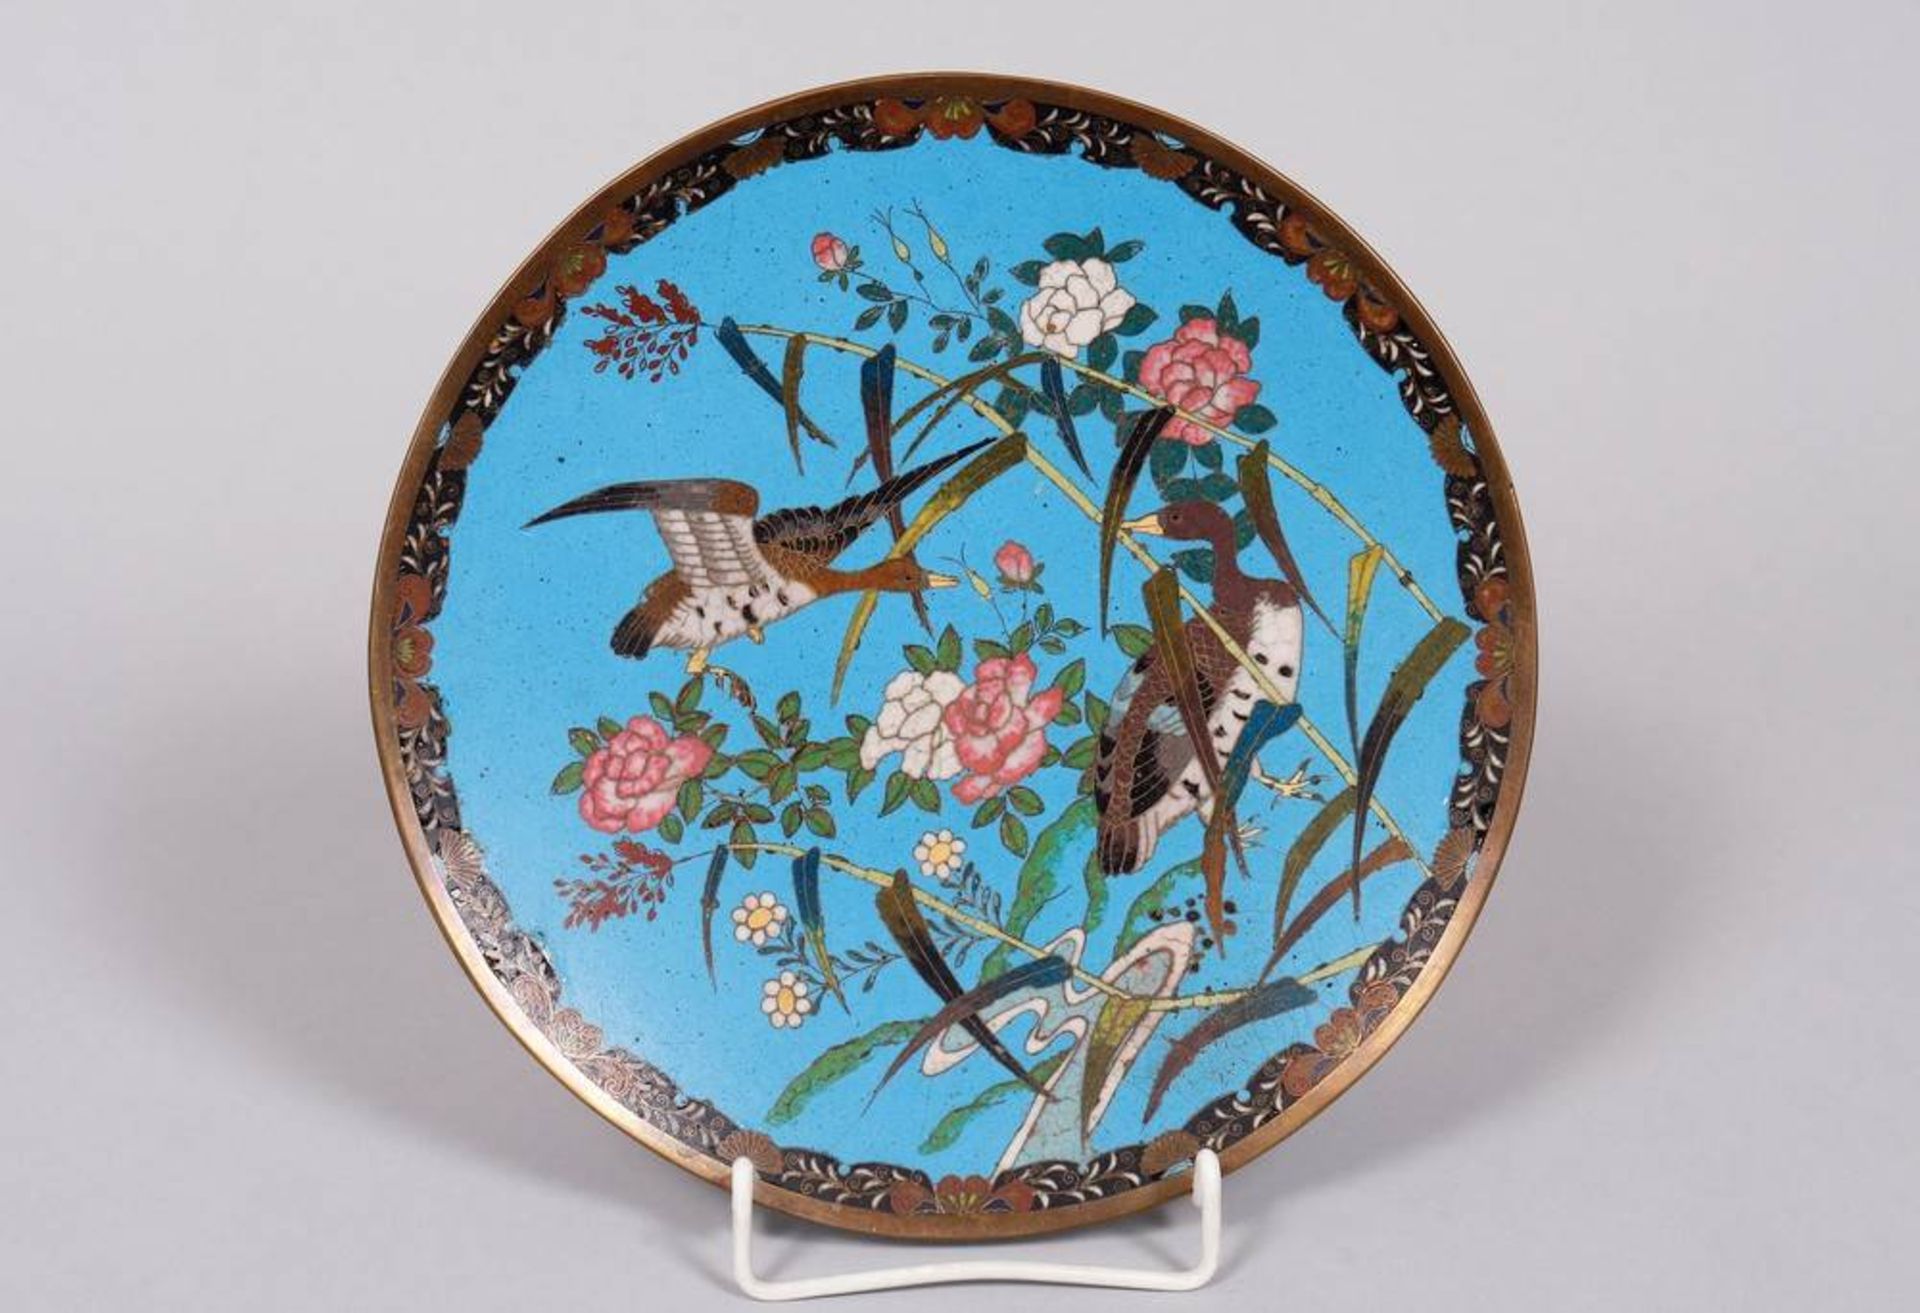 Cloisonné plate, China, early 20th C.